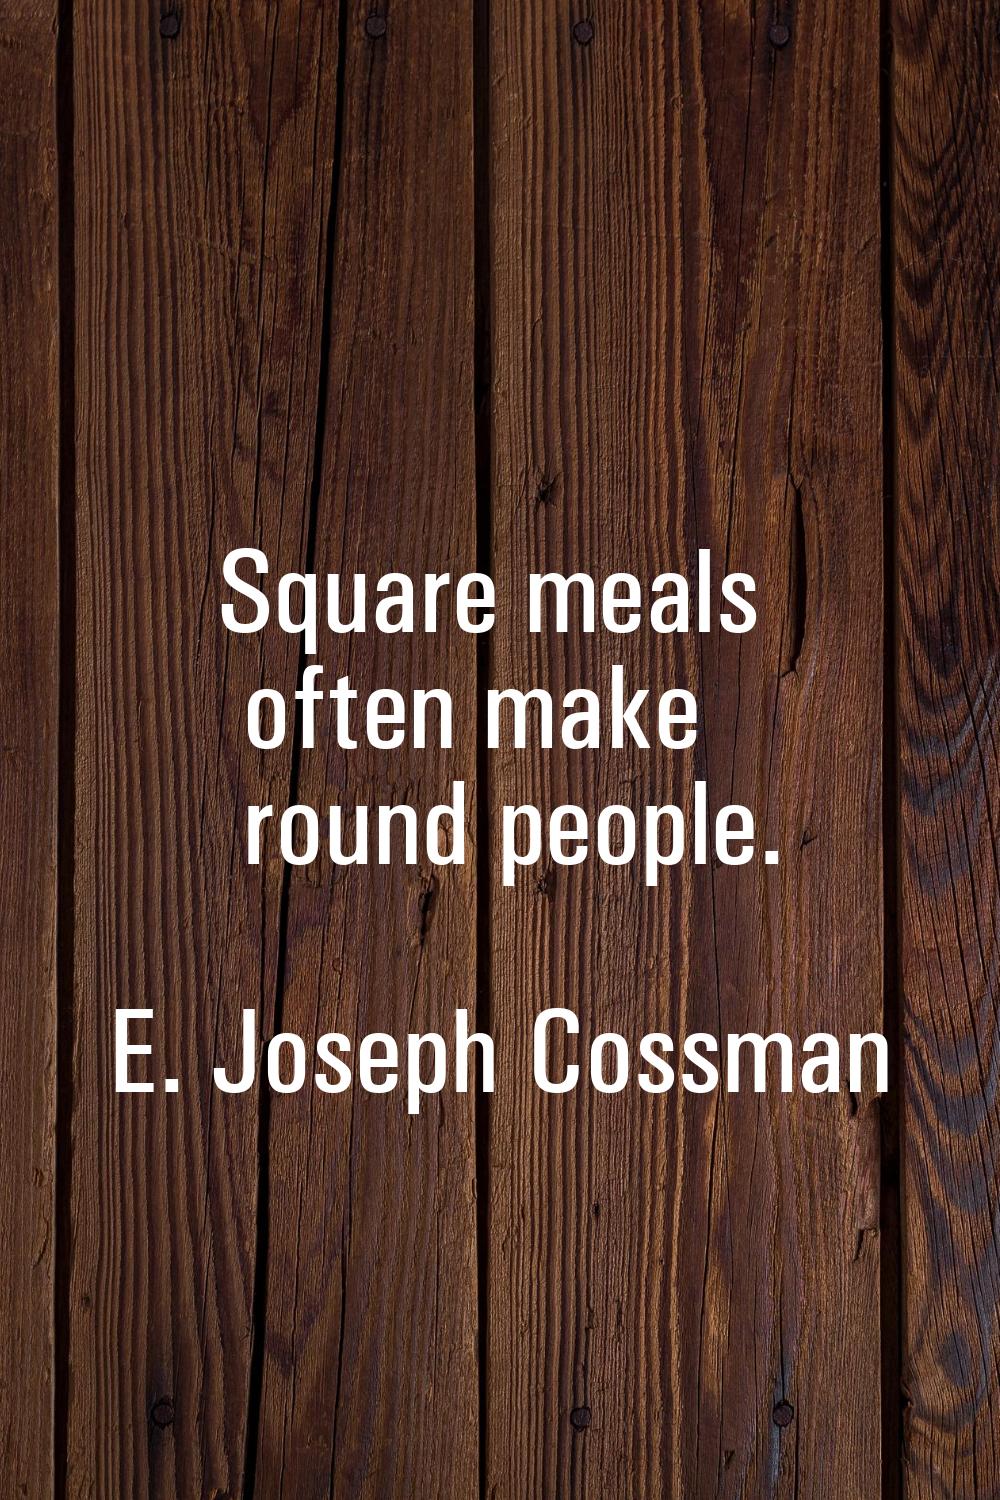 Square meals often make round people.